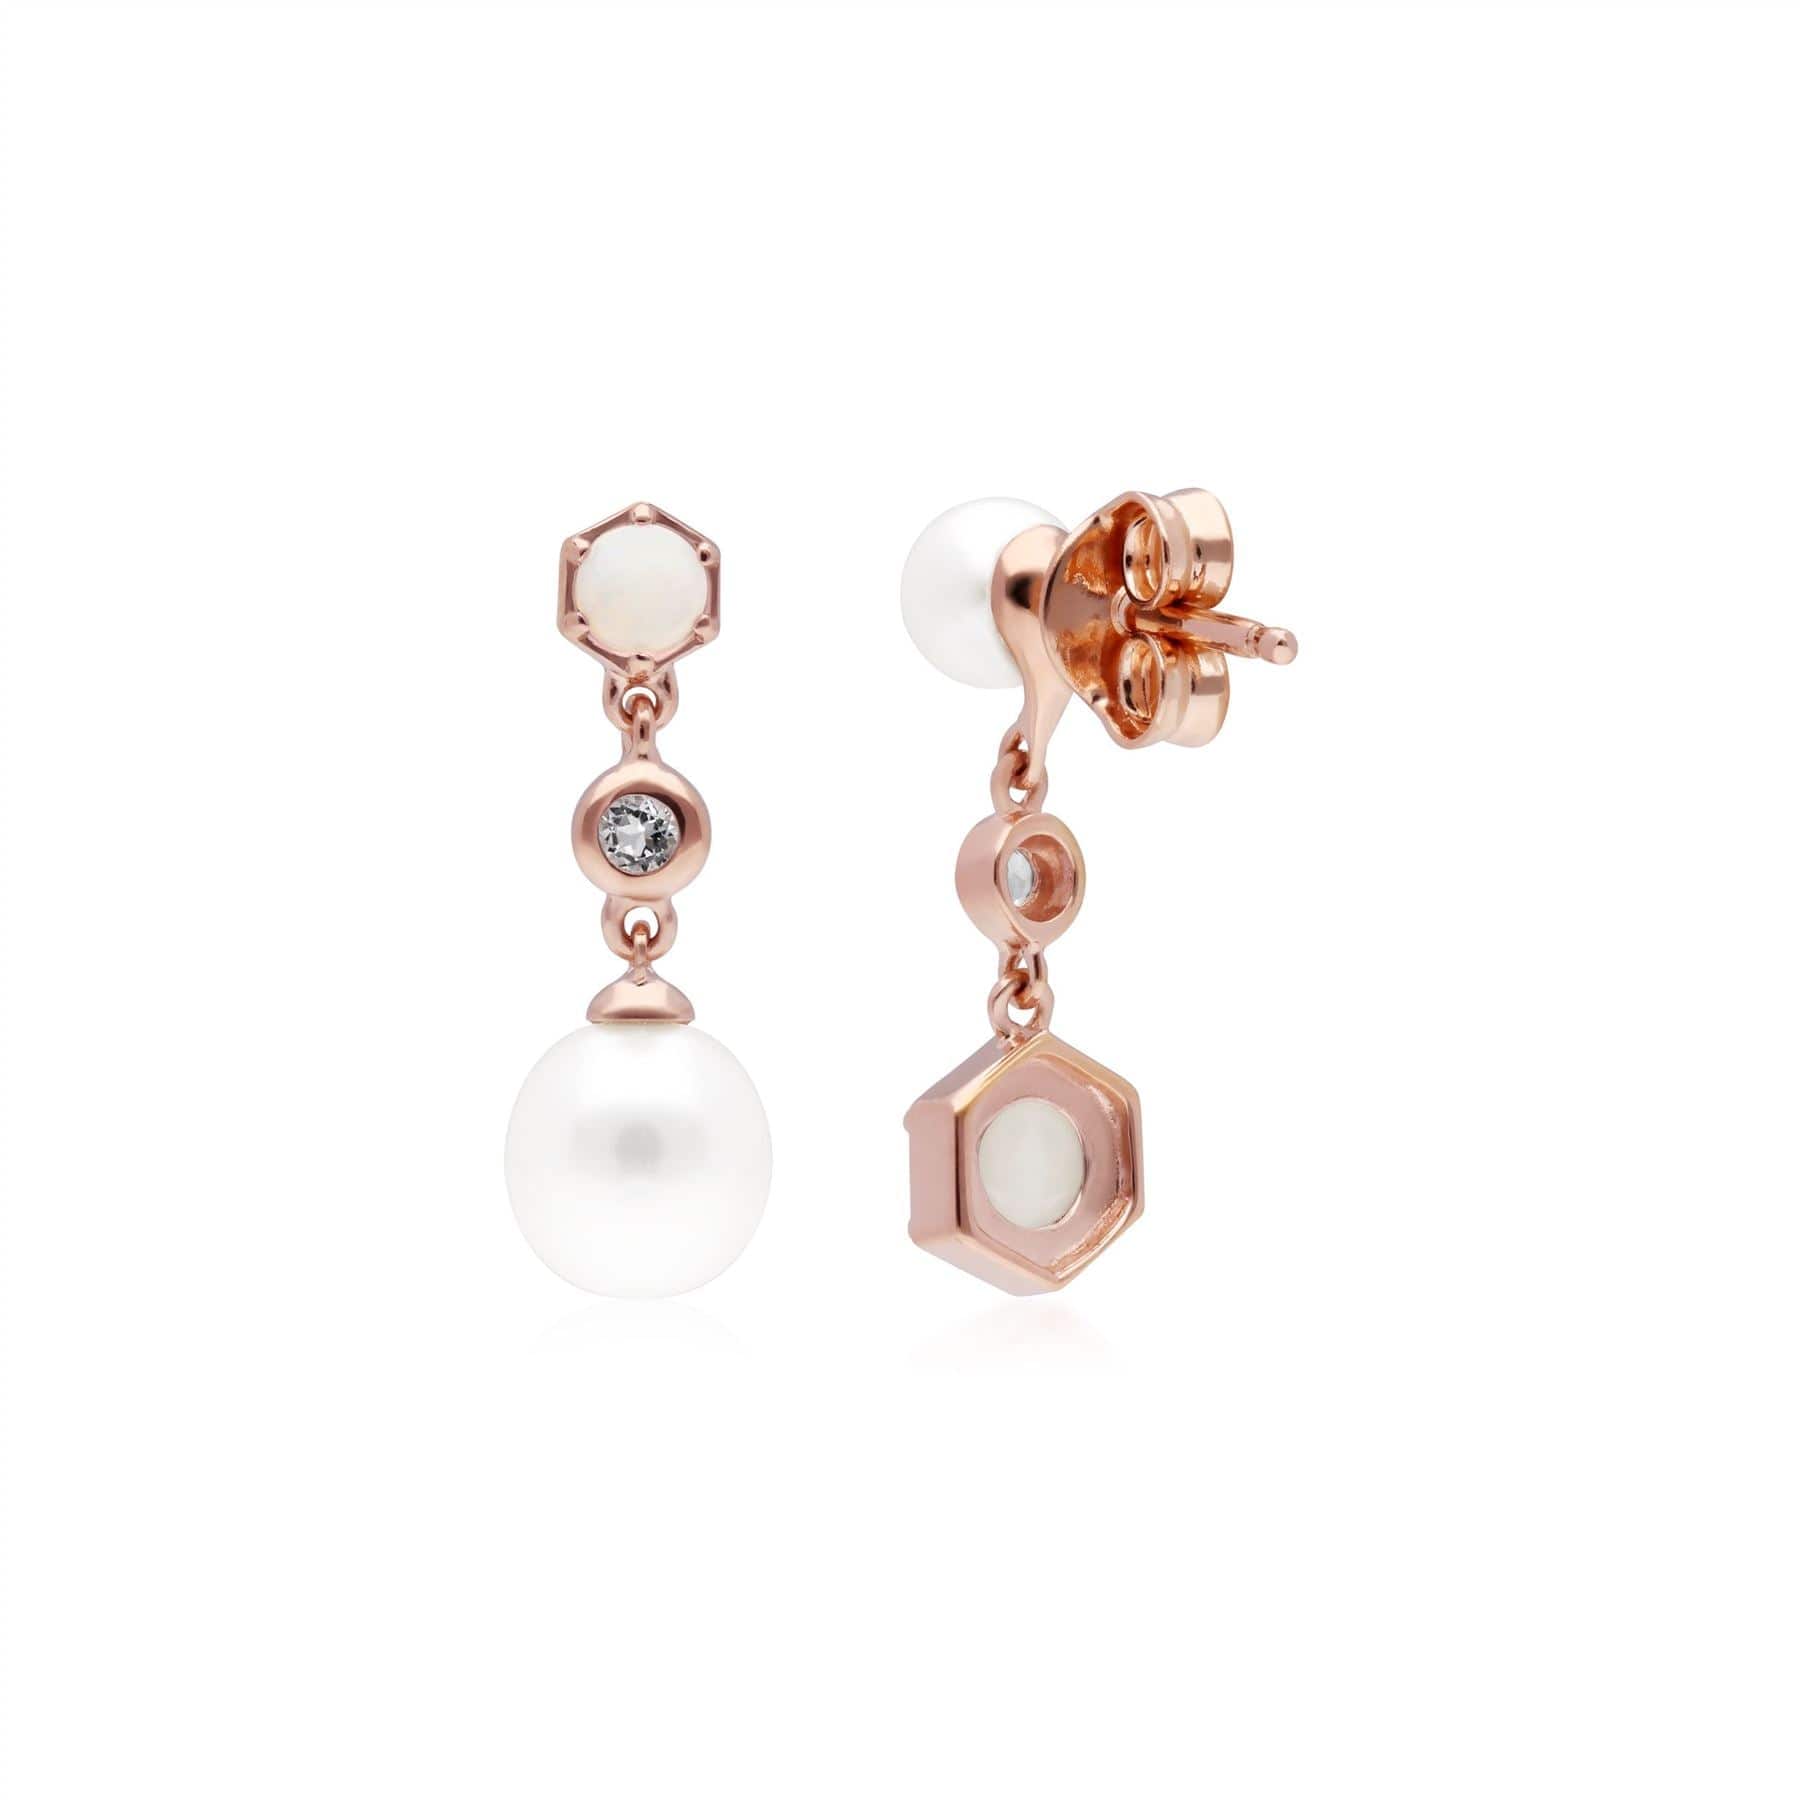 Modern Pearl, Opal & Topaz Mismatched Drop Earrings in Rose Gold Plated Sterling Silver